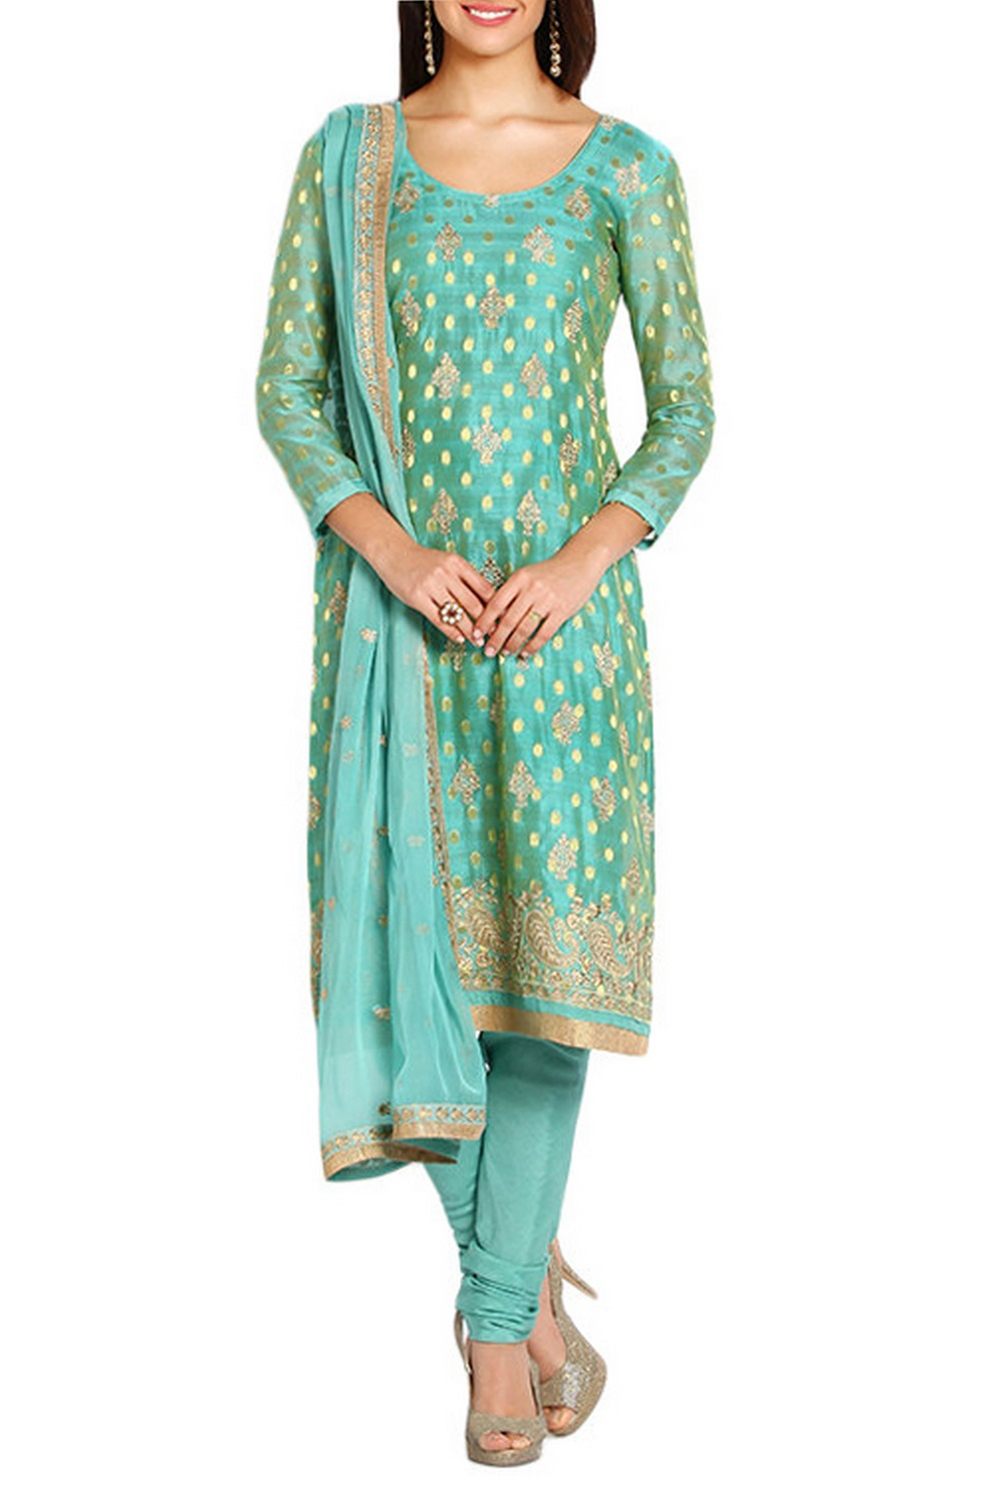 Turquoise Blue Suit Set - Indian Clothing in Denver, CO, Aurora, CO, Boulder, CO, Fort Collins, CO, Colorado Springs, CO, Parker, CO, Highlands Ranch, CO, Cherry Creek, CO, Centennial, CO, and Longmont, CO. Nationwide shipping USA - India Fashion X